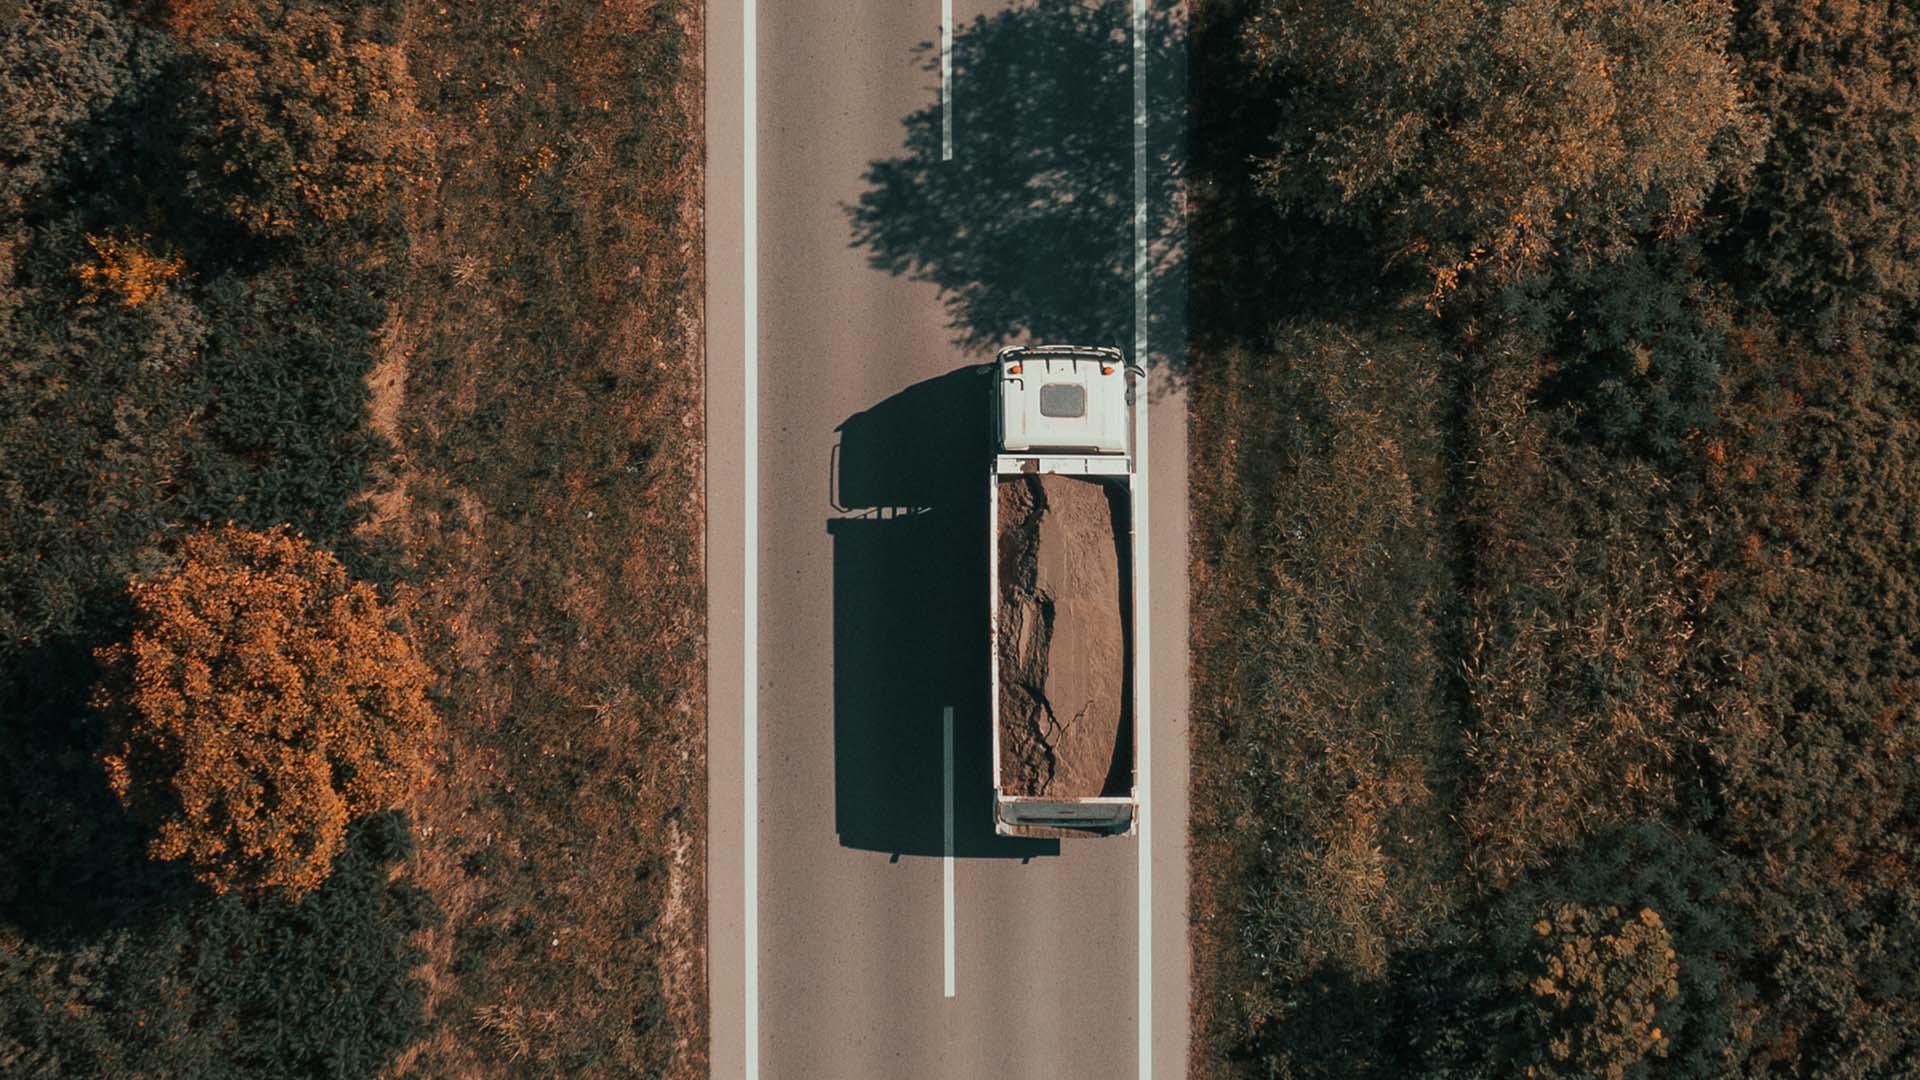 Truck_Delivering_Sand_Aerial_View_16_9-1